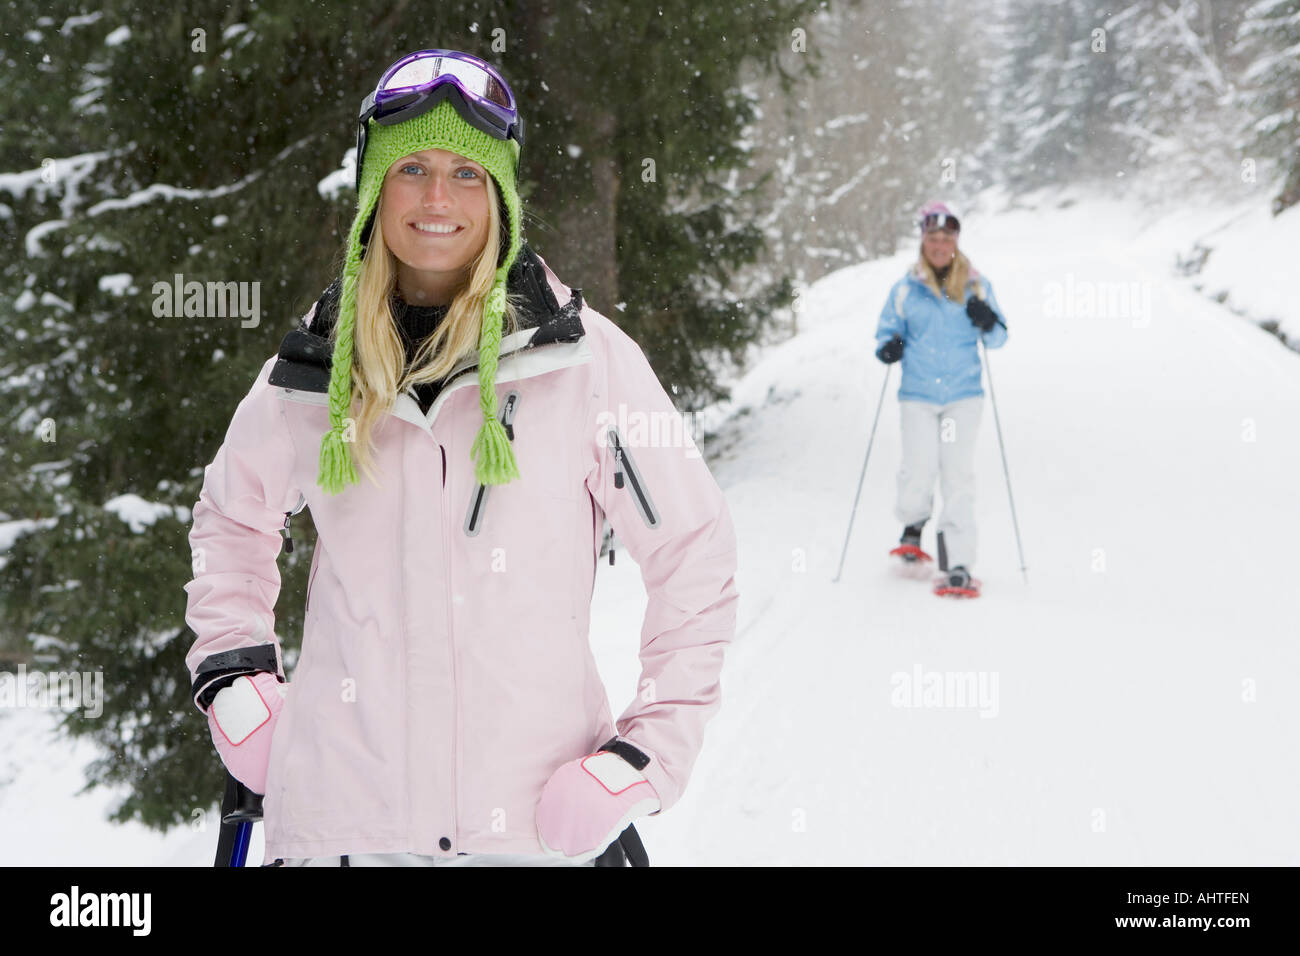 Young woman smiling on ski-slope, person in background on snow-shoes, portrait Stock Photo